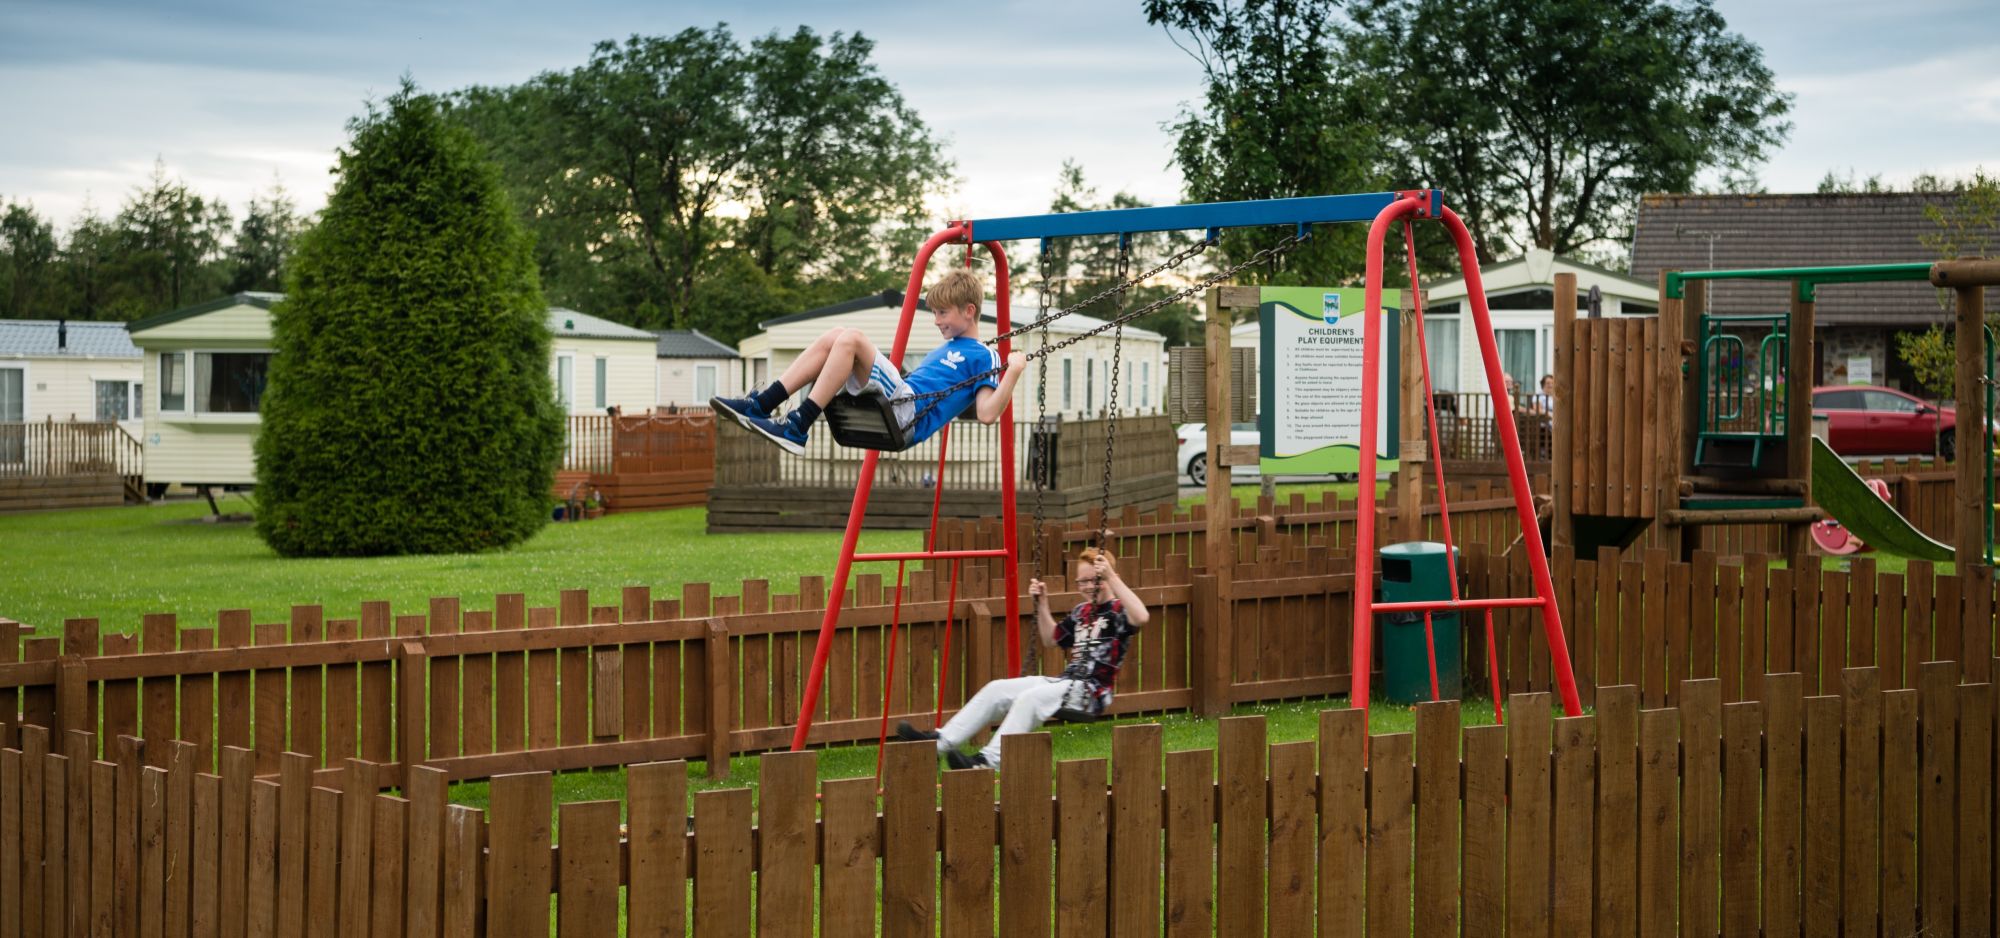 Children's play park at Woodland Vale